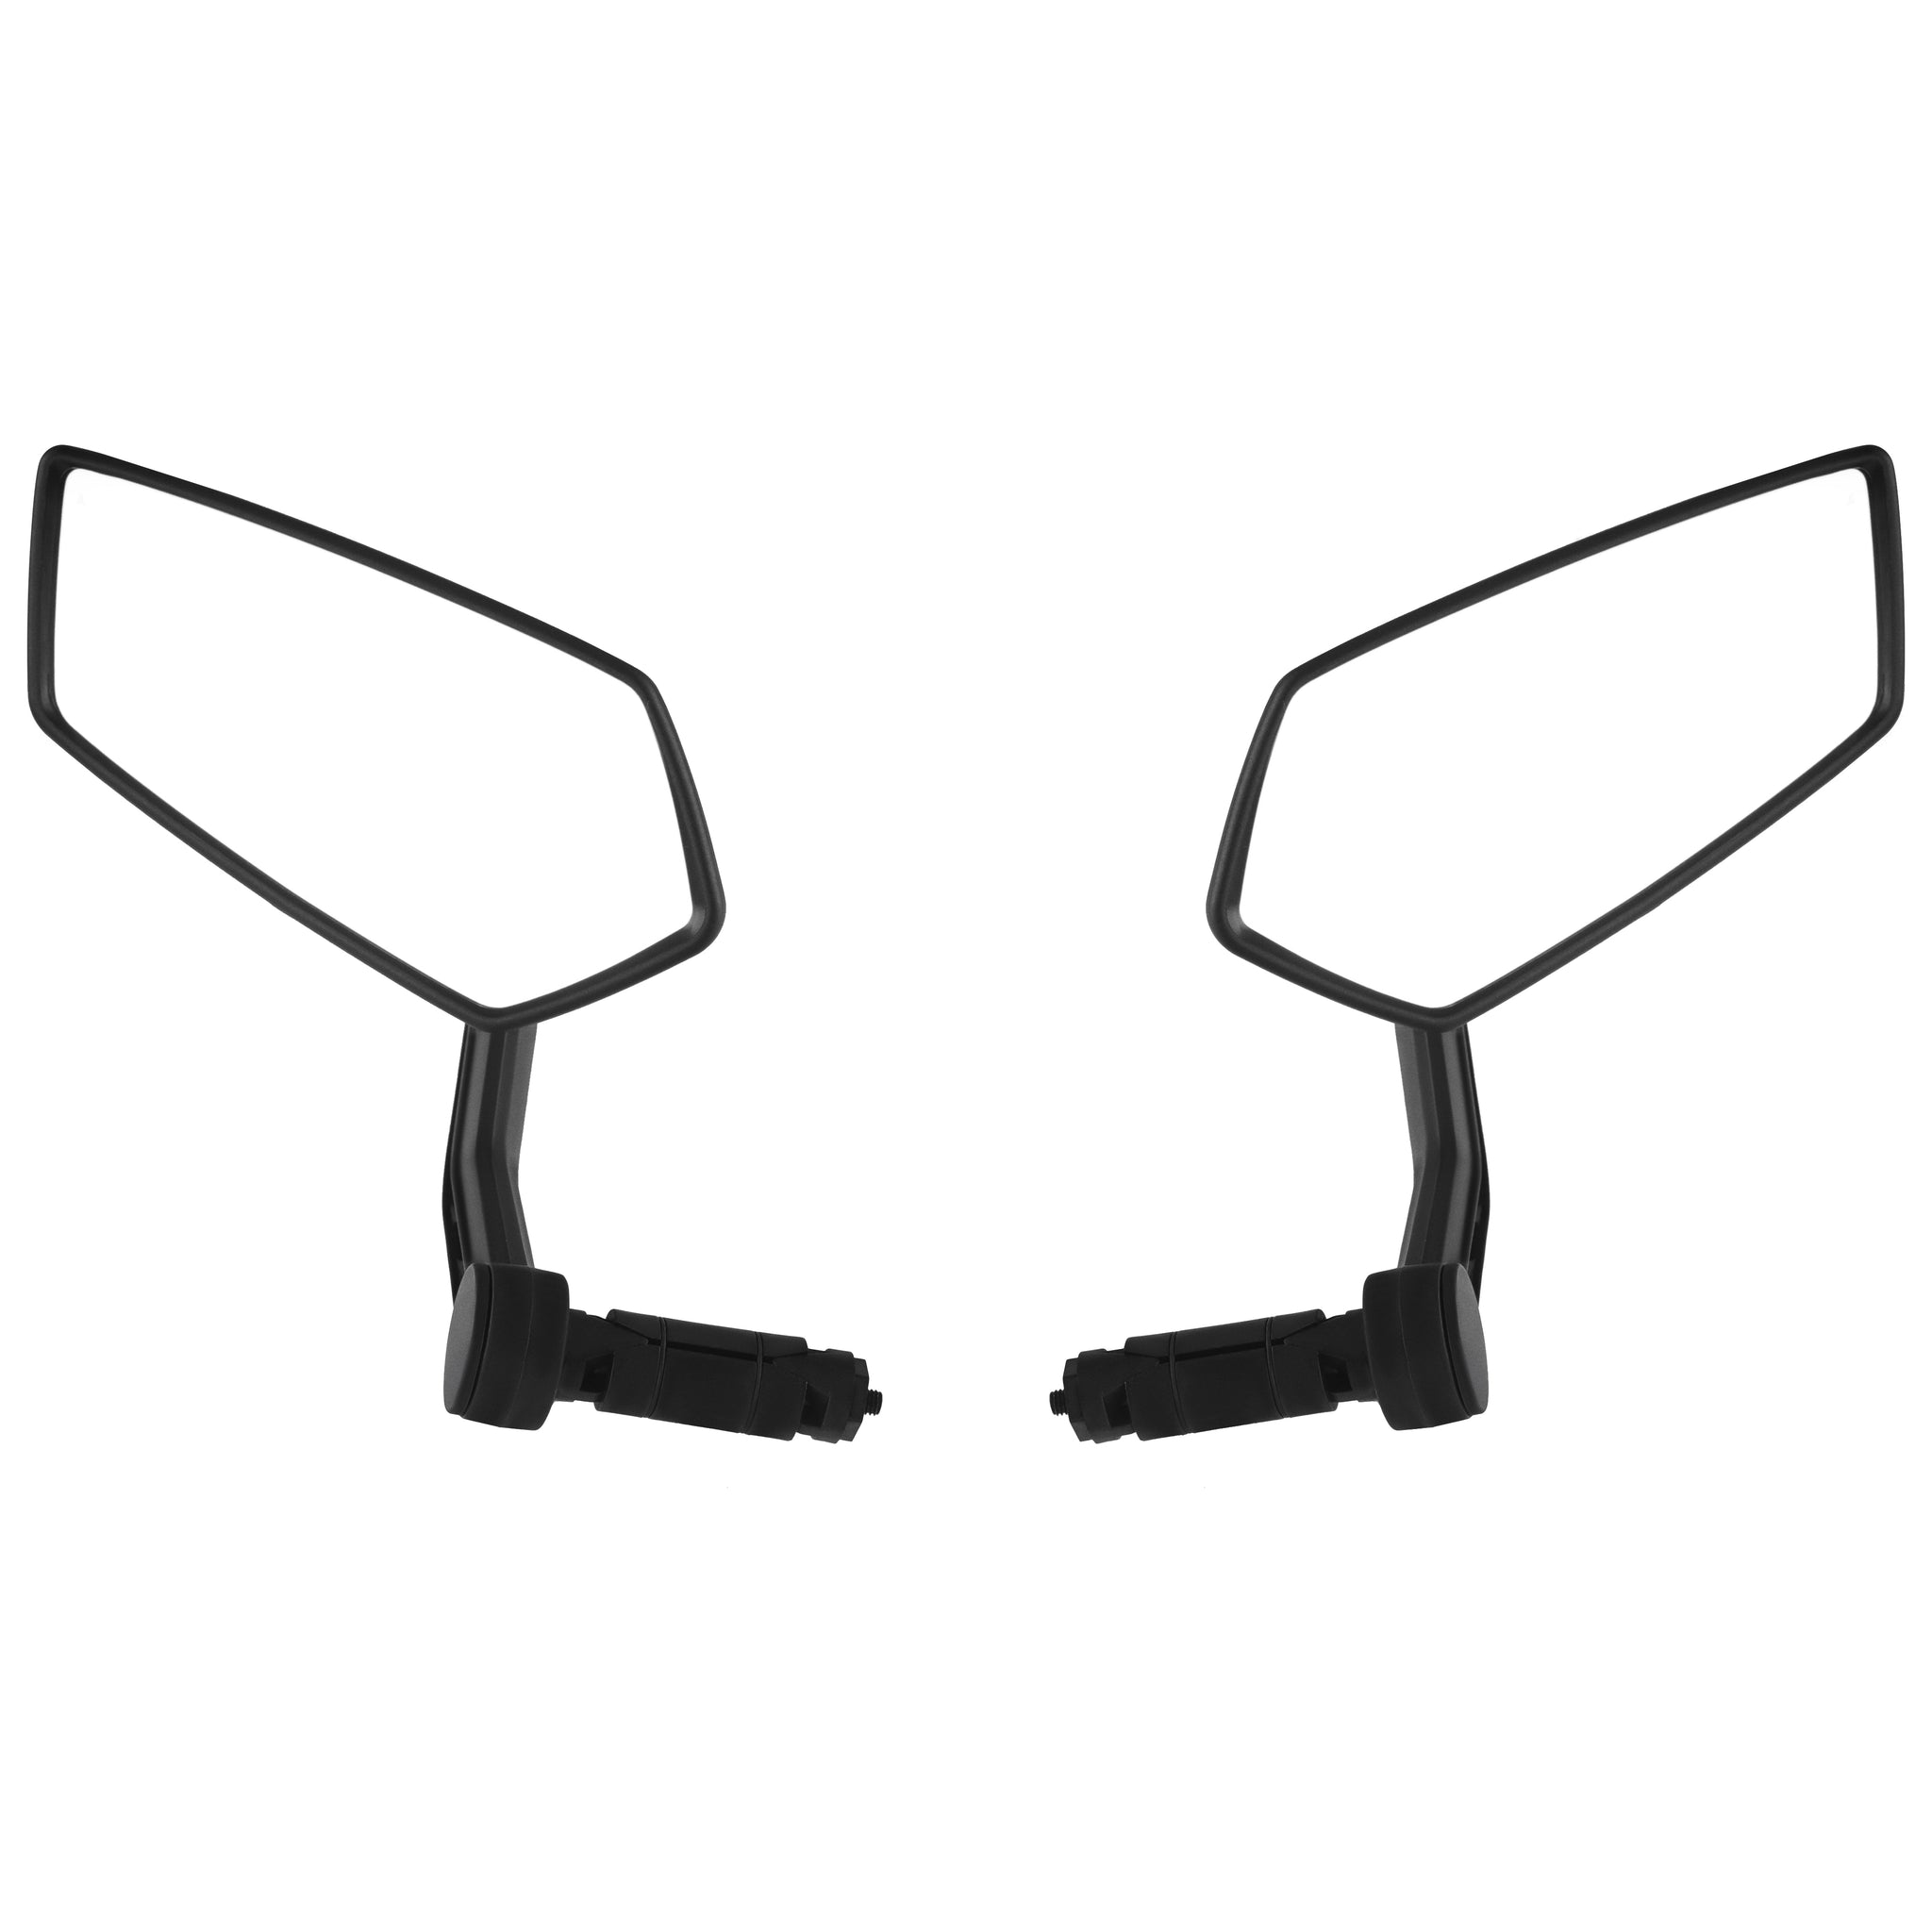 HD Wide-angle Handlebar Rearview Mirror (A pair)